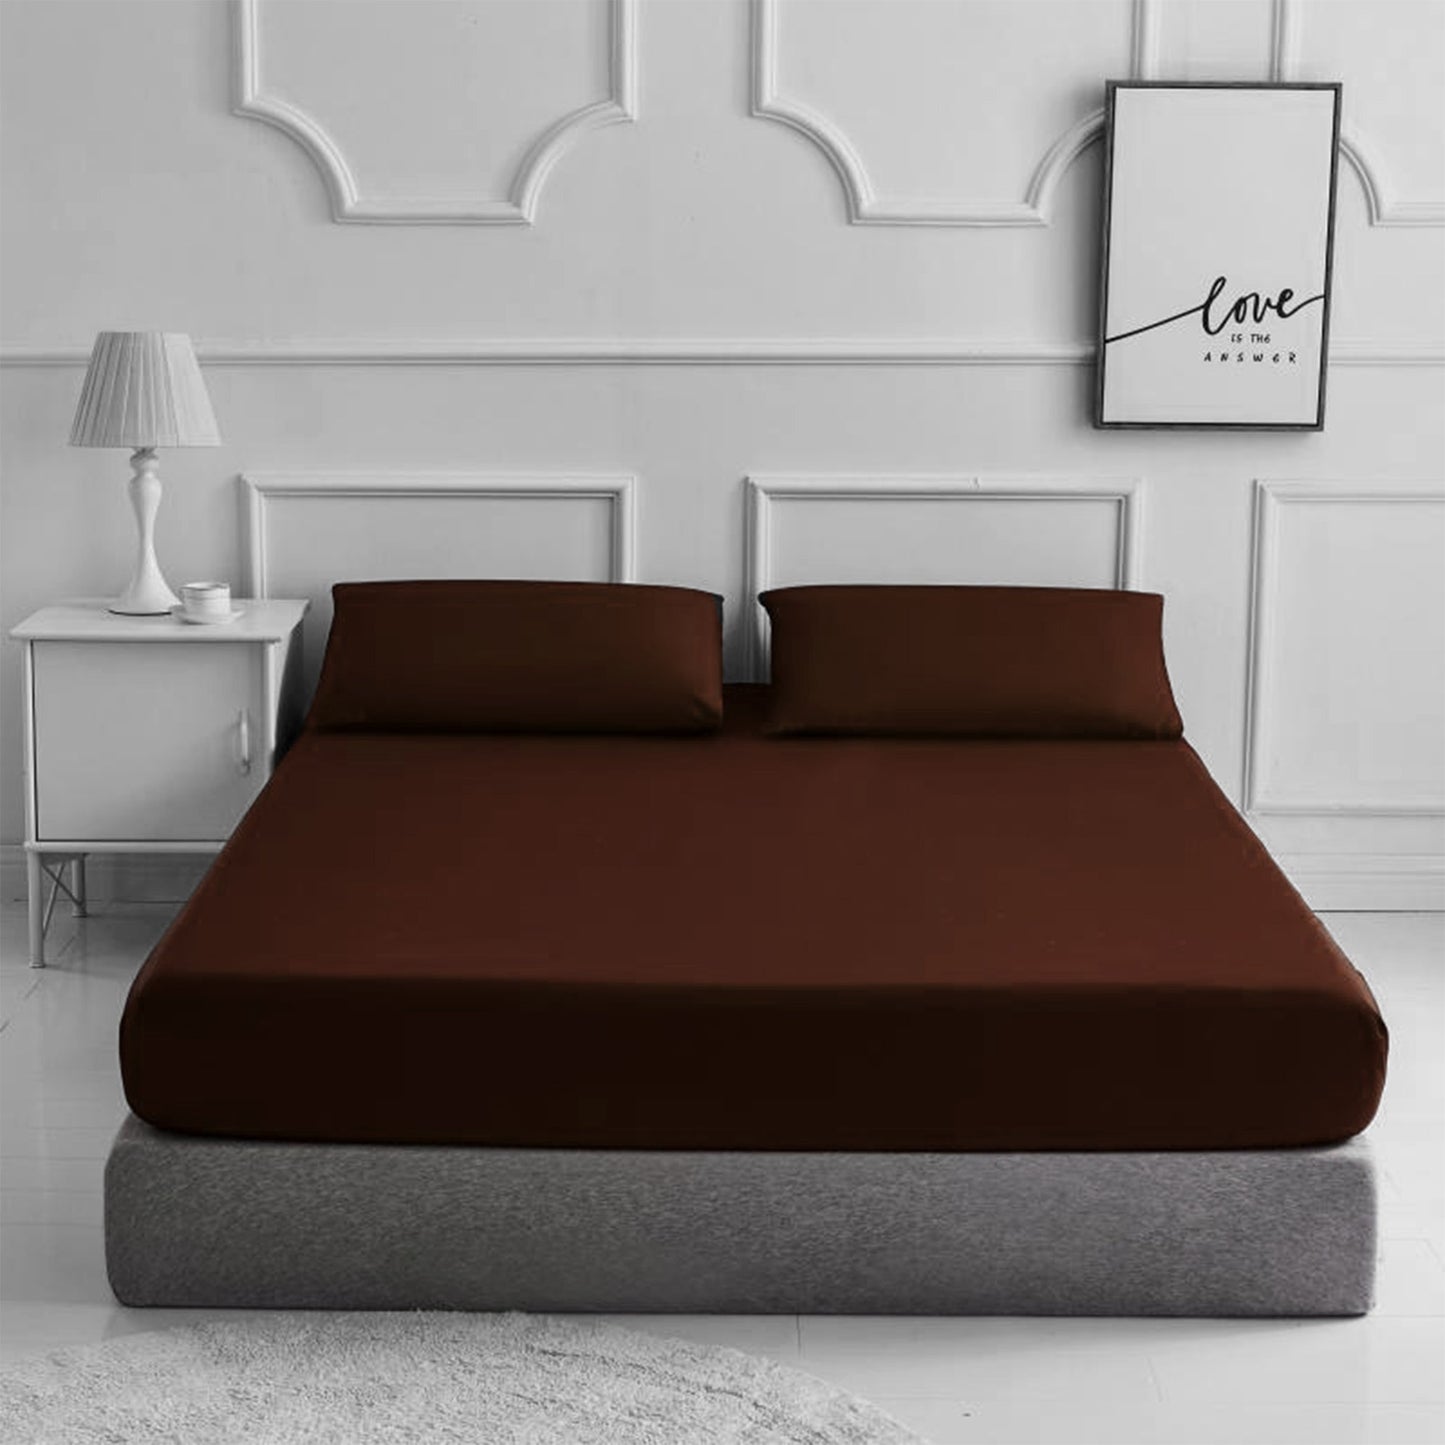 Fitted Bed Sheet Matching FREE 2 X PILLOW CASE Plain Dyed - TheComfortshop.co.ukBed Sheets0721718963608thecomfortshopTheComfortshop.co.ukPC FIT FREE PP Chocolate KingChocolateKingFitted Bed Sheet Matching FREE 2 X PILLOW CASE Plain Dyed - TheComfortshop.co.uk